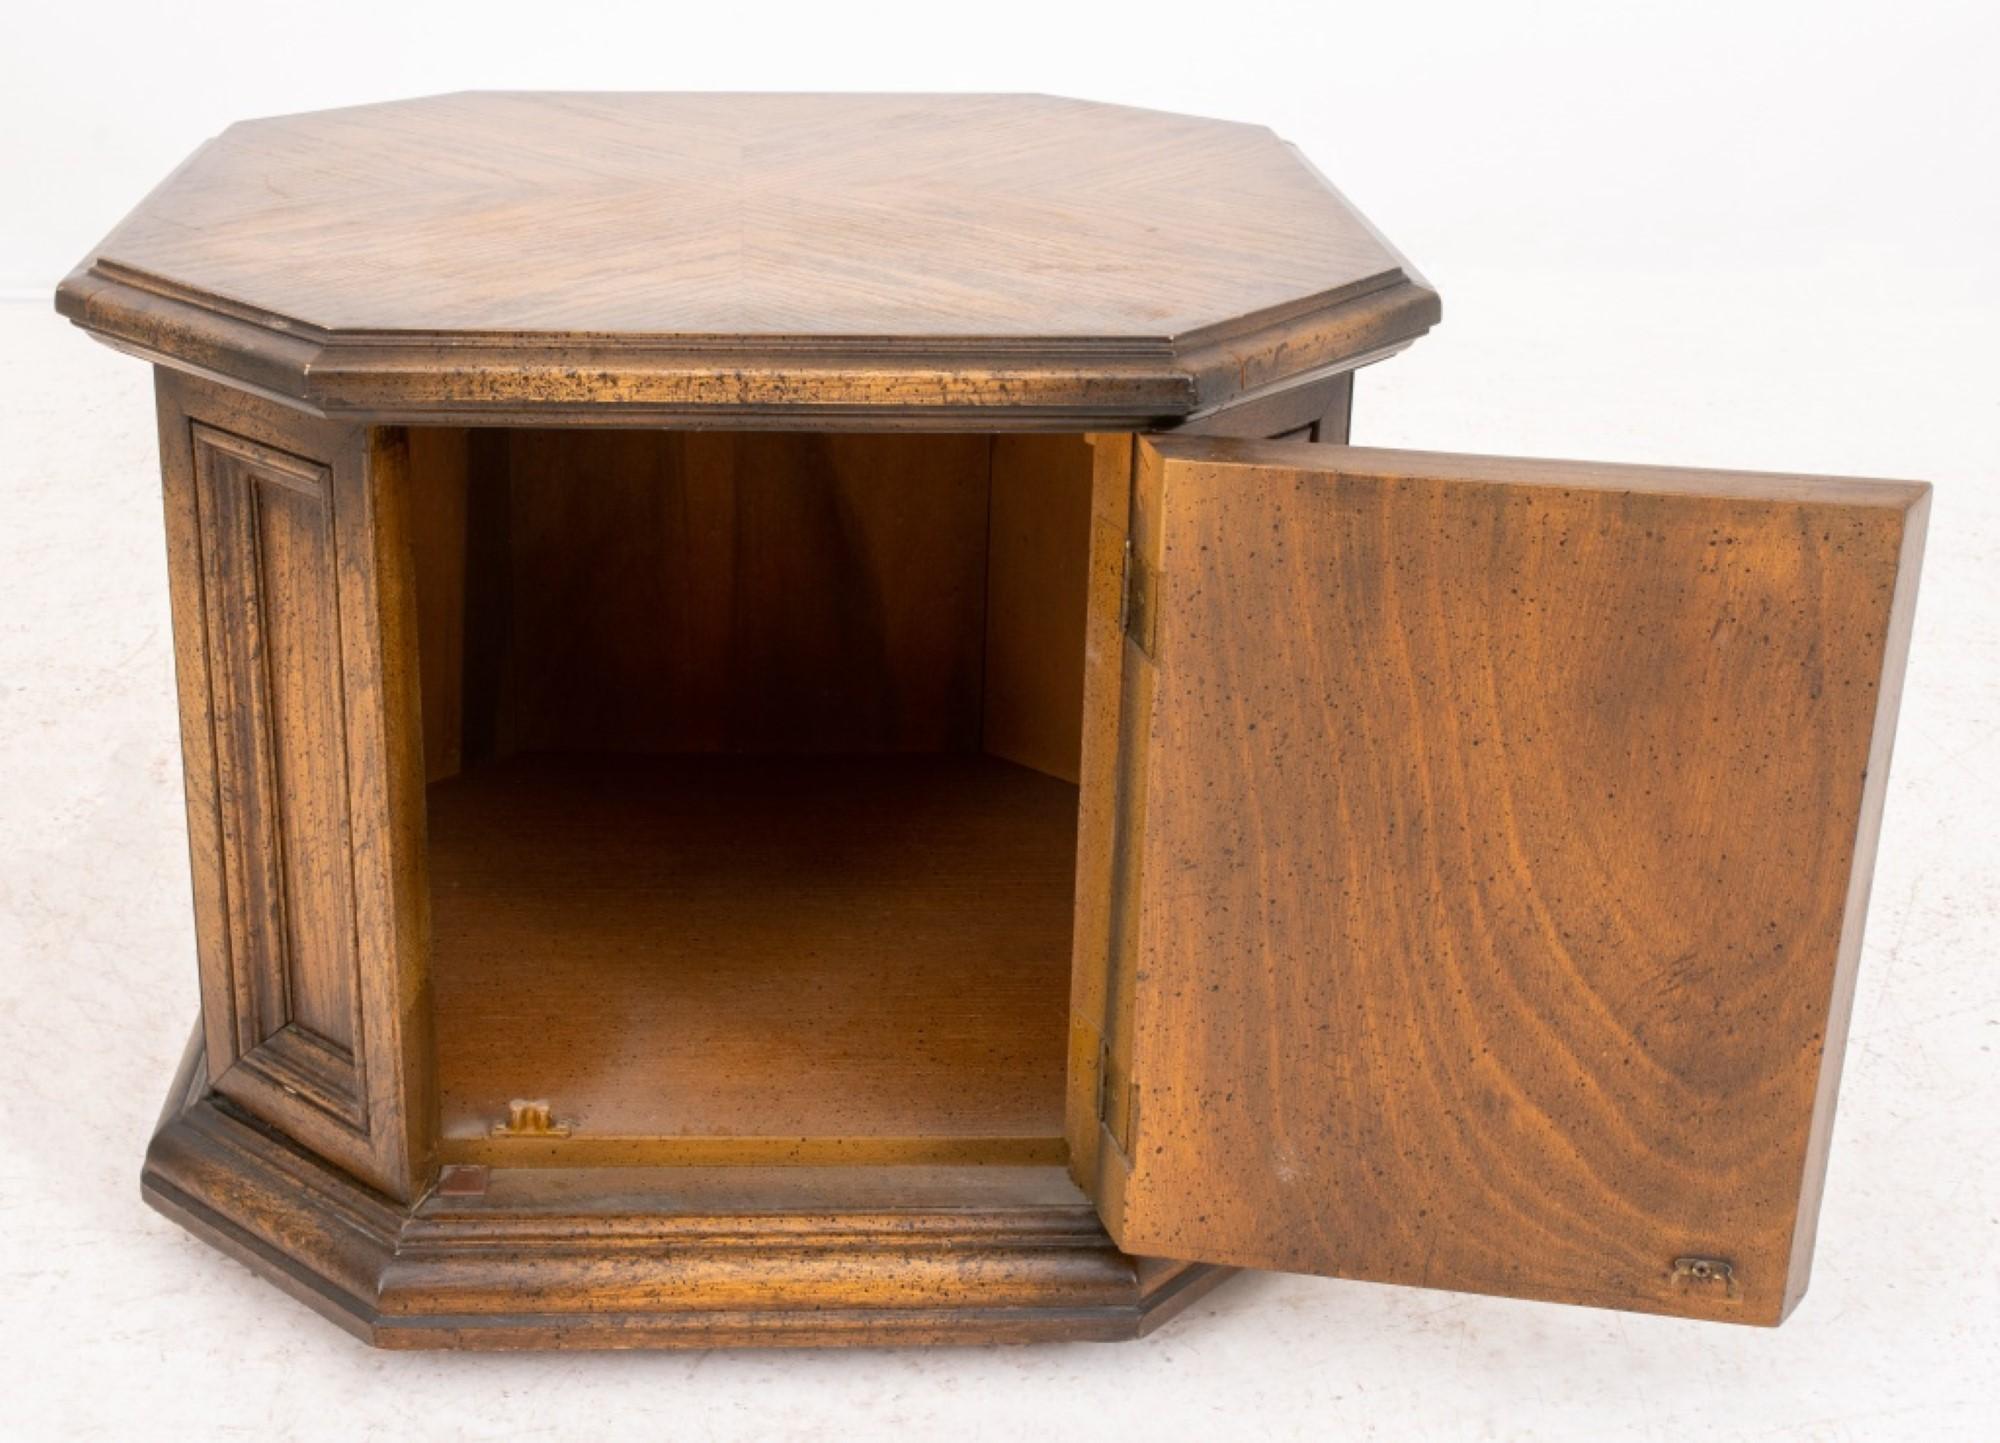 Octagonal side table in the Renaissance taste, featuring doors with low relief carving, and mounted on a molded plinth. The dimensions are approximately 21 inches in height, 26 inches in width, and 26 inches in depth.